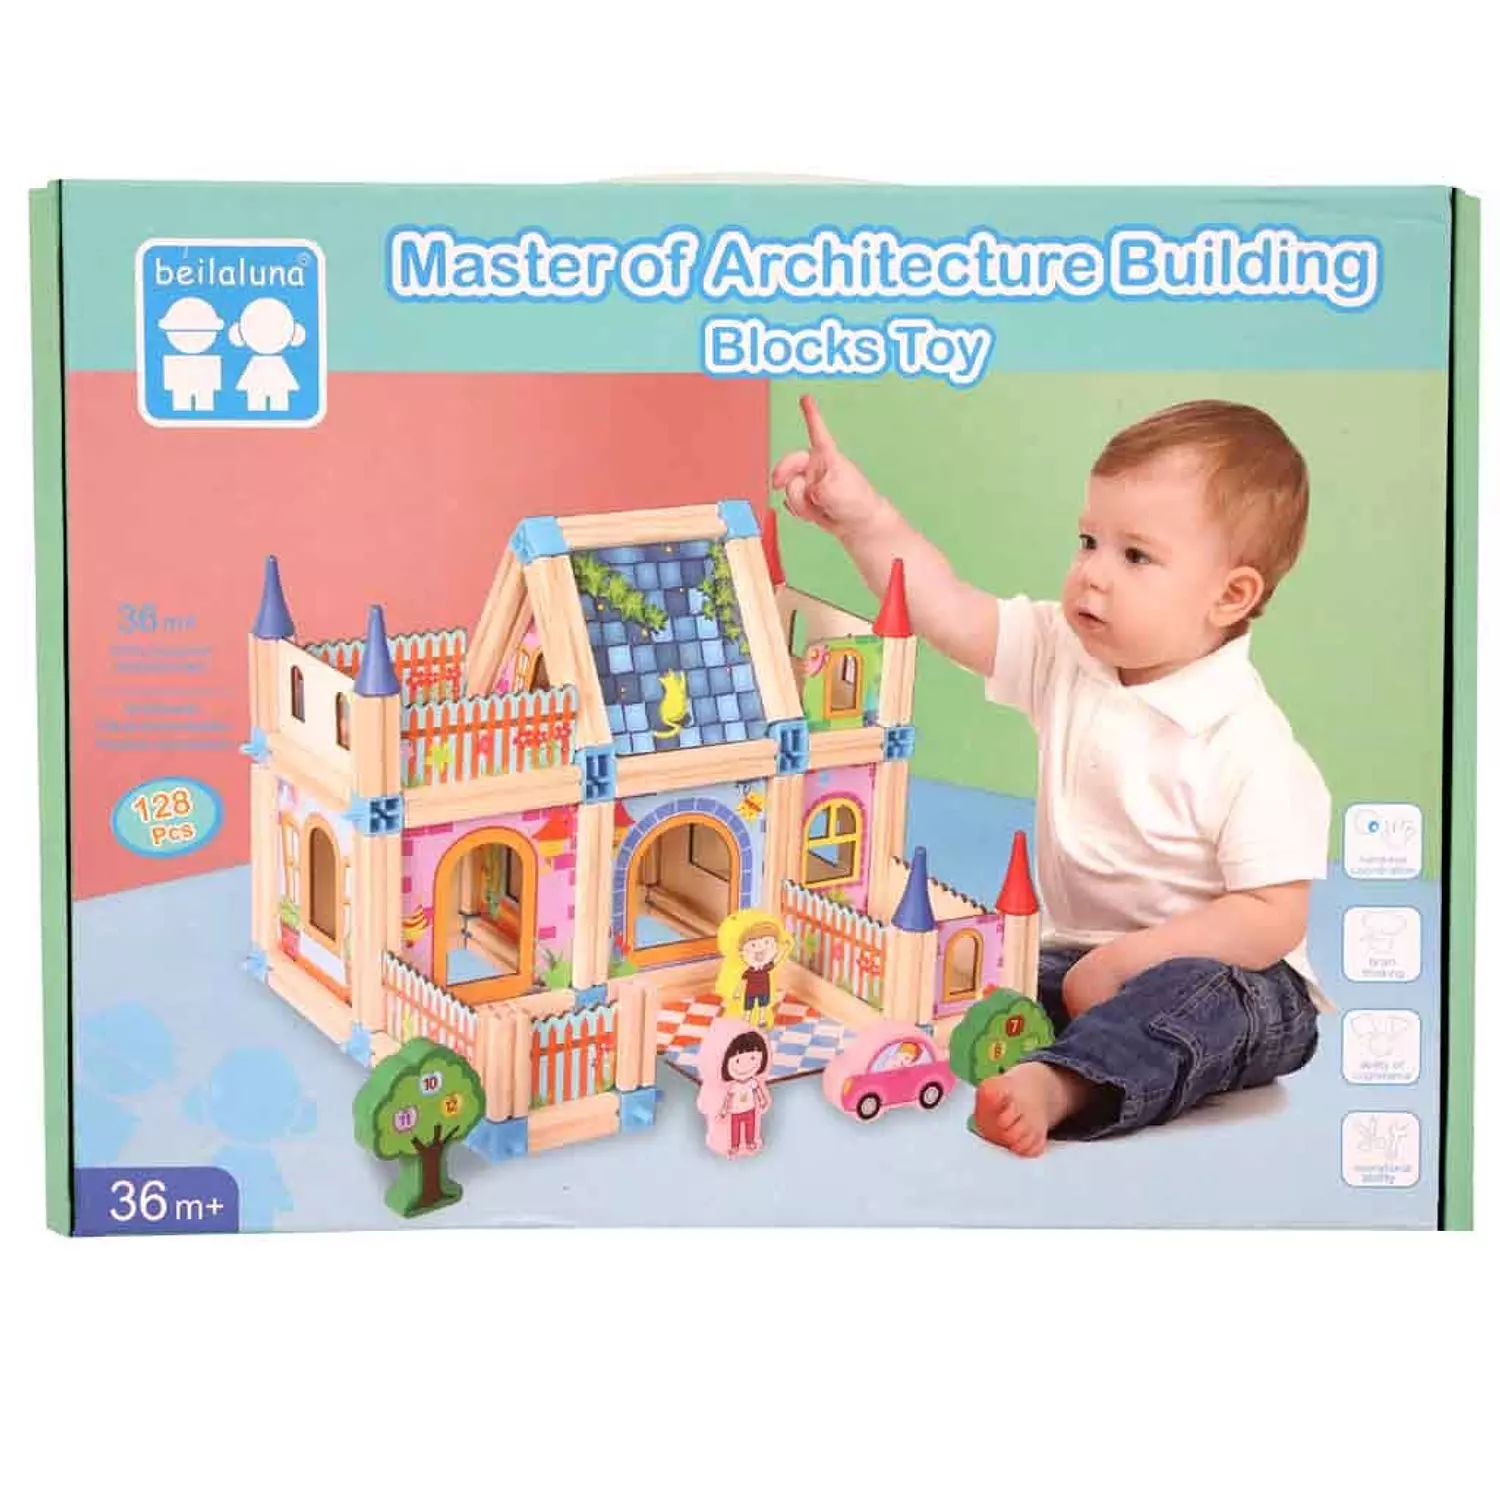 Master of Architecture Building Blocks Toy 2